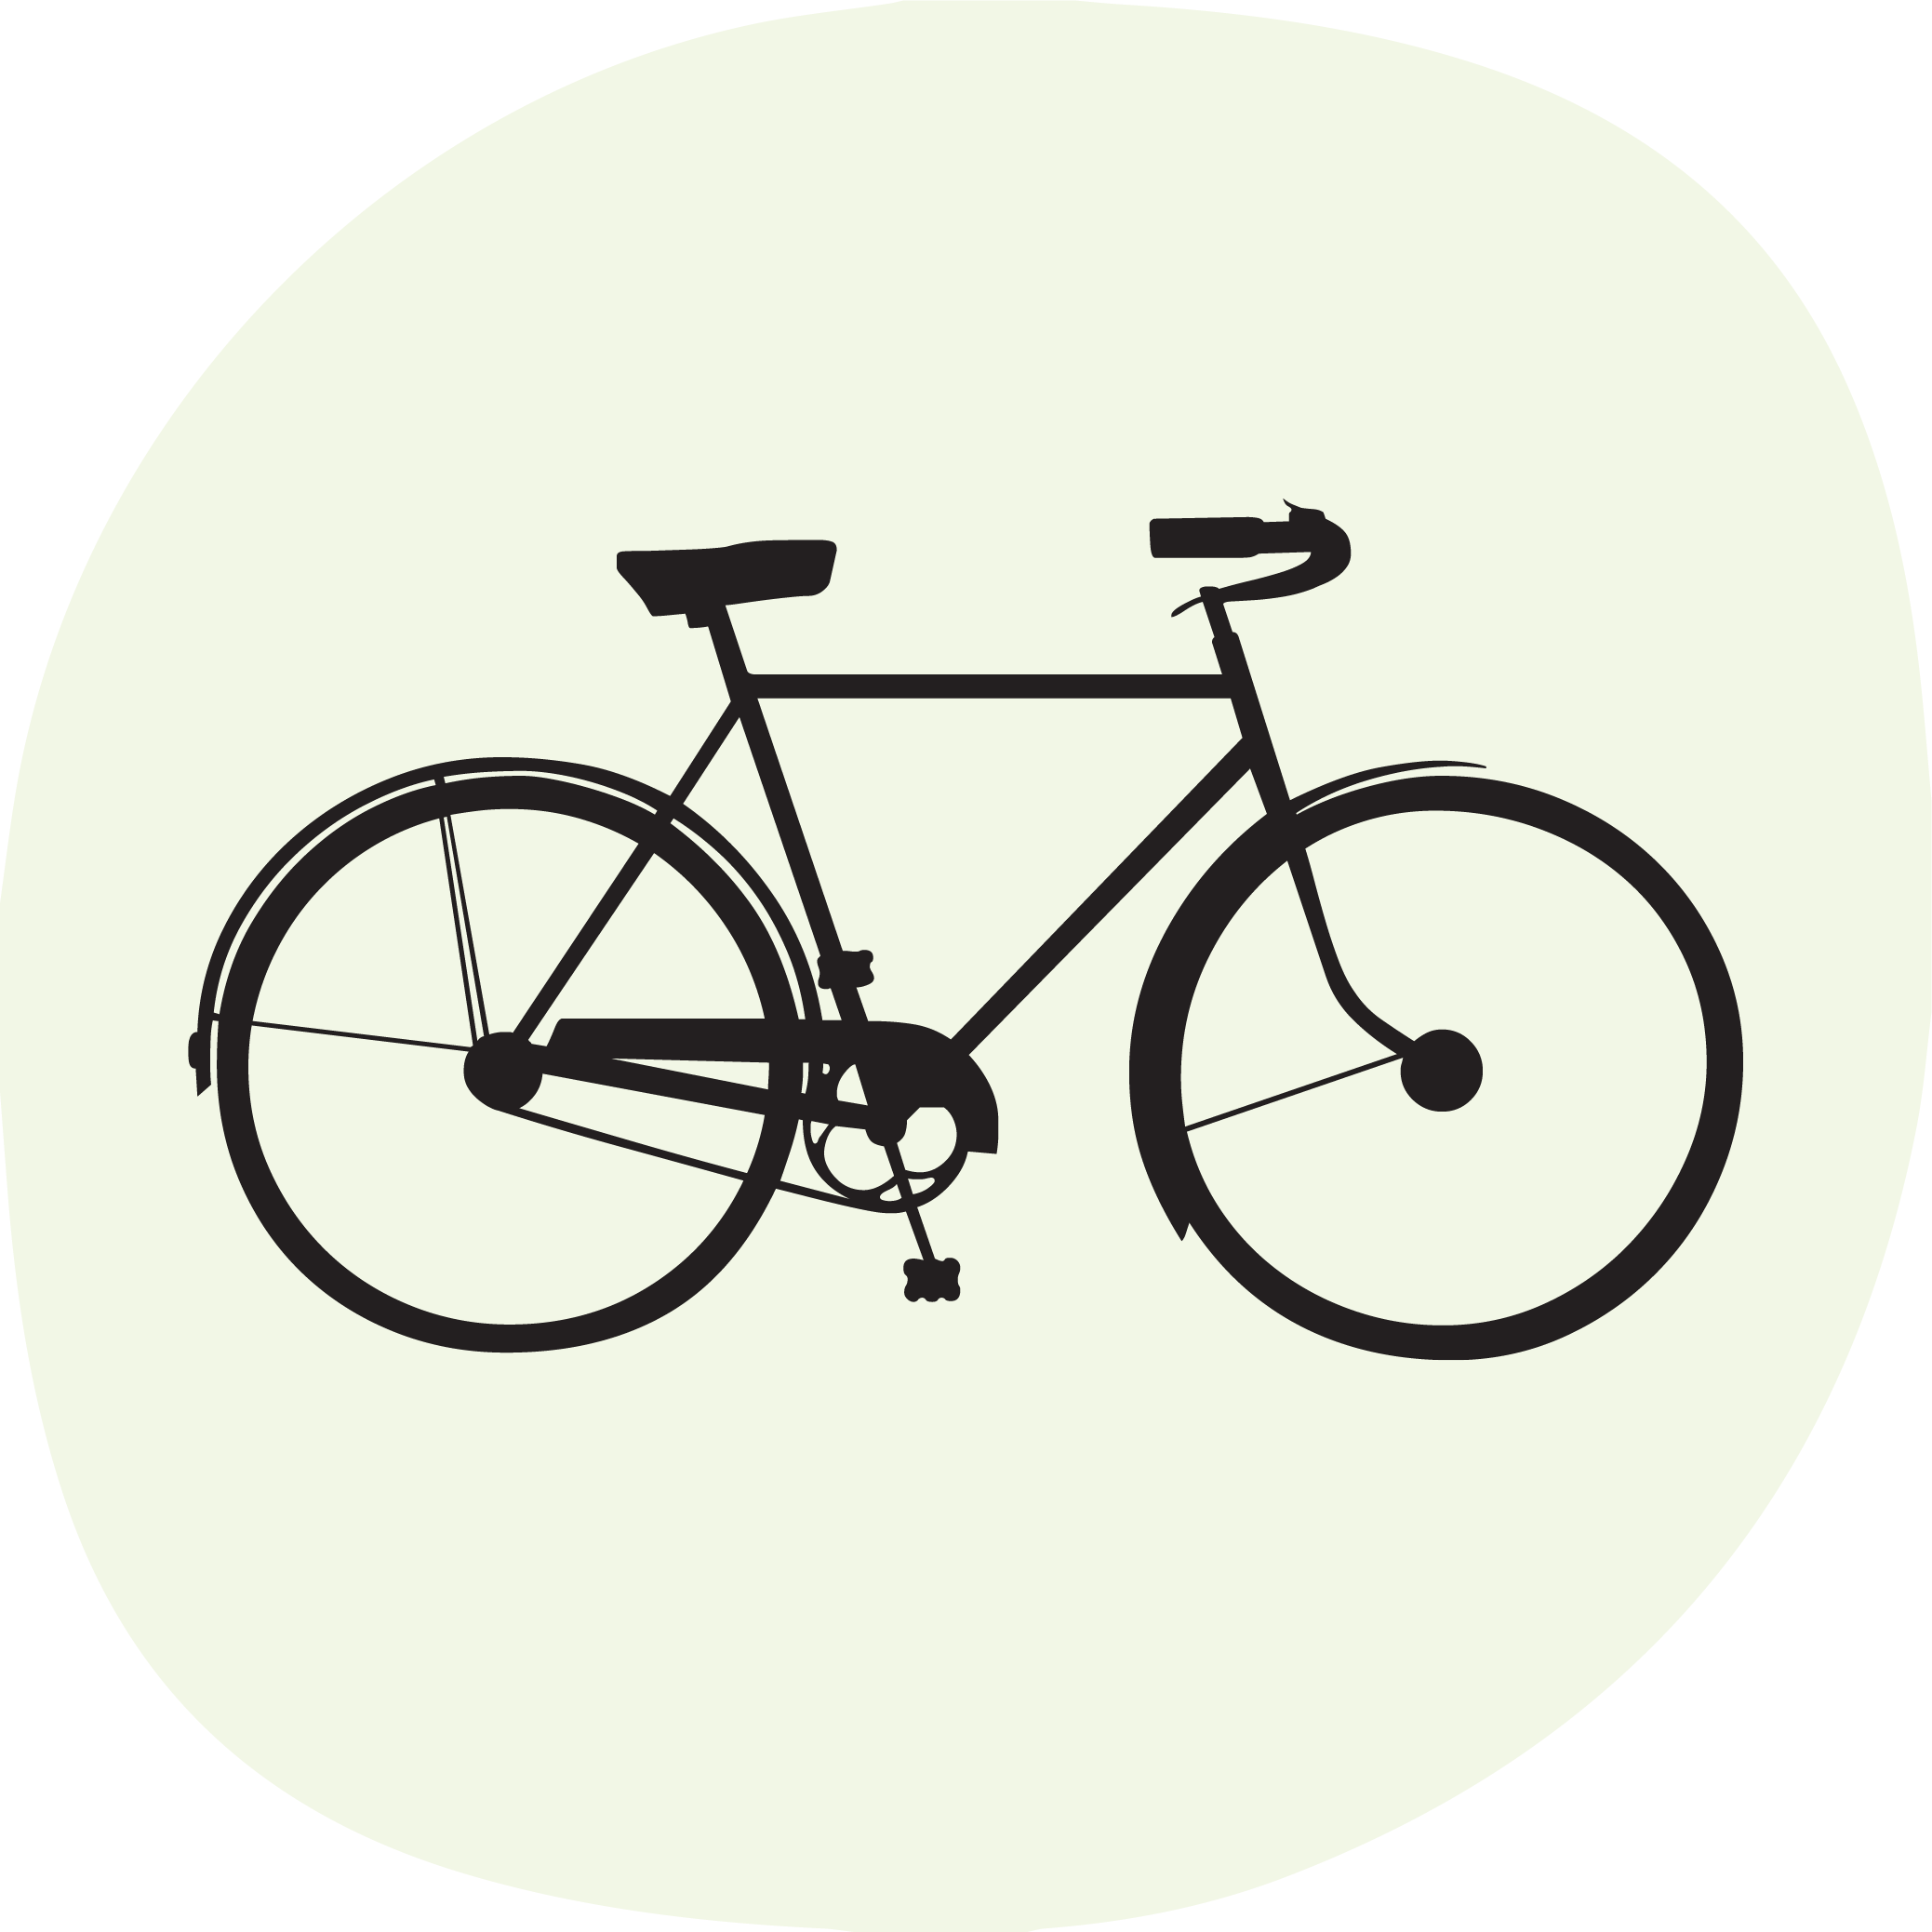 Bike icon with light green background.